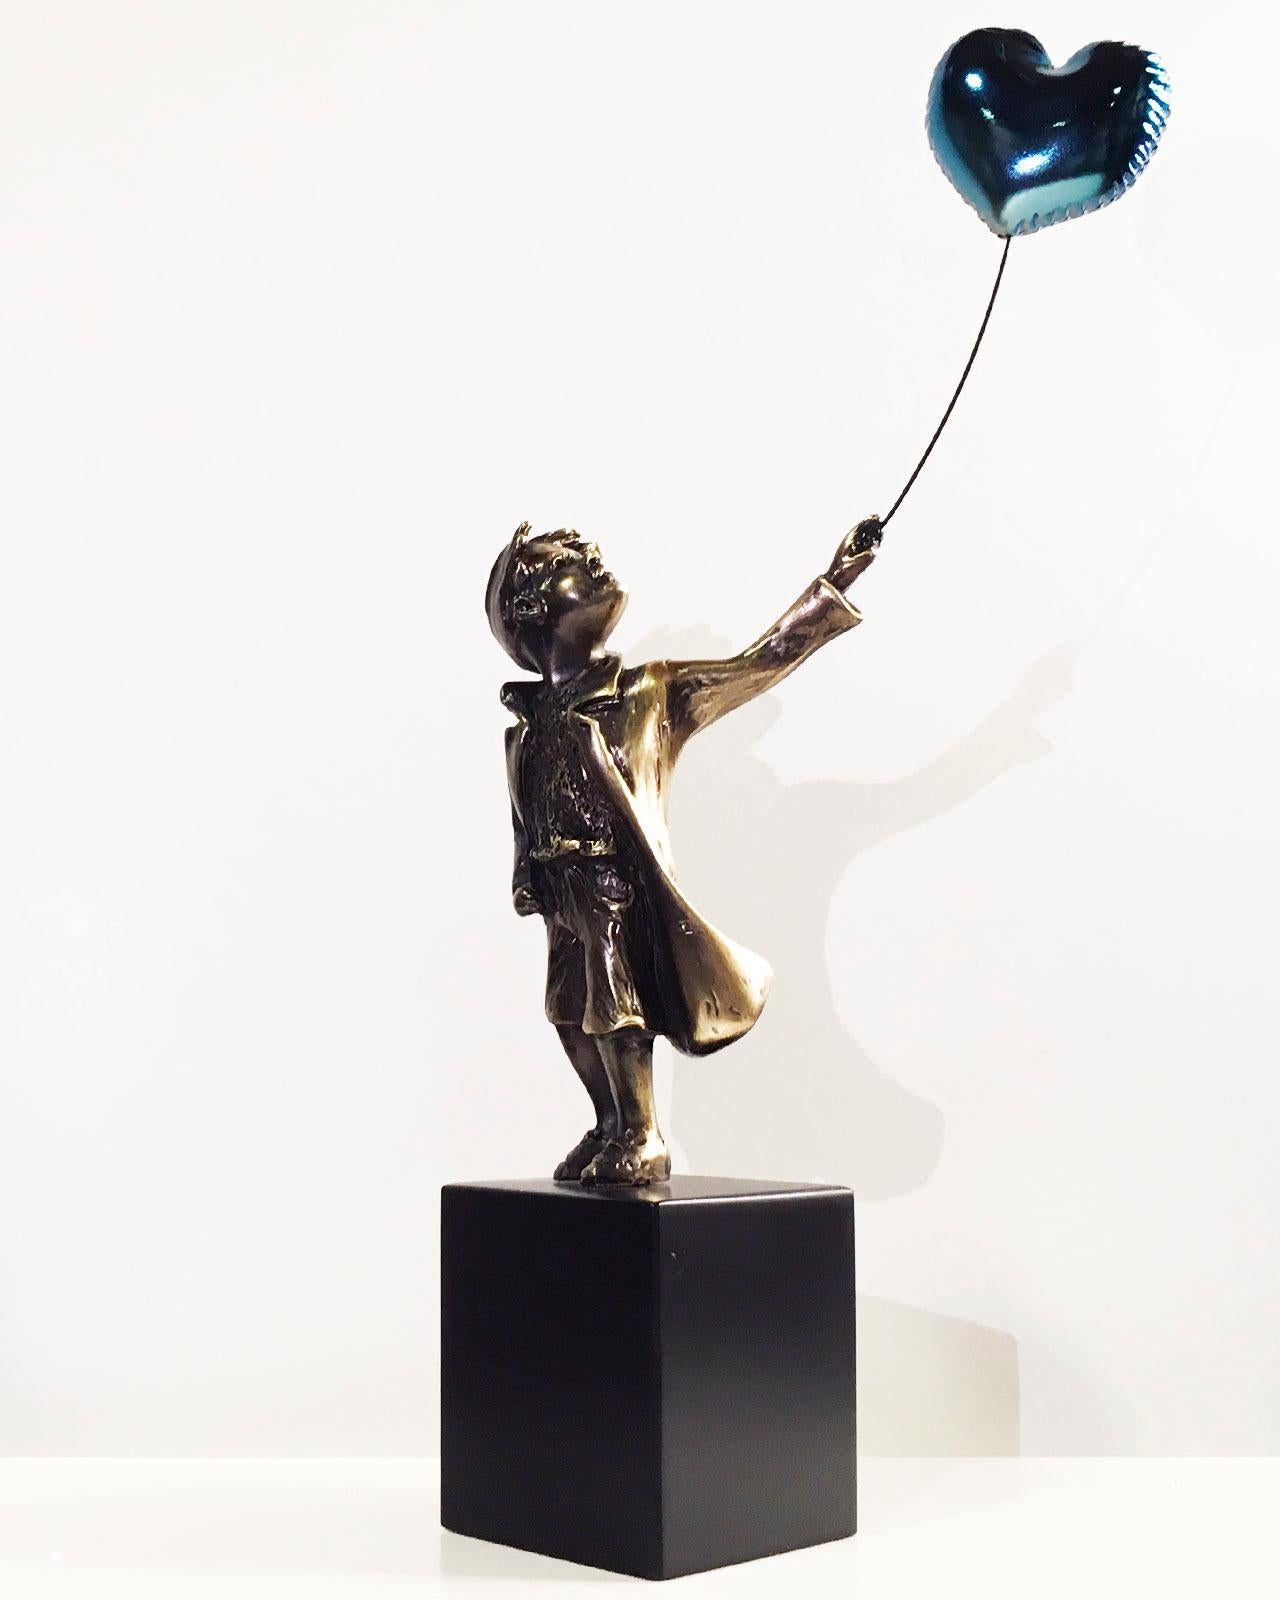 Street Art Sculpture "A boy with balloon" by Miguel Guía.
This sculpture is made by lost wax bronze casting.
Limited edition of 299 works.
The base is included in the price.
The dimensions given include the base.
This Sculpture are copyrighted and